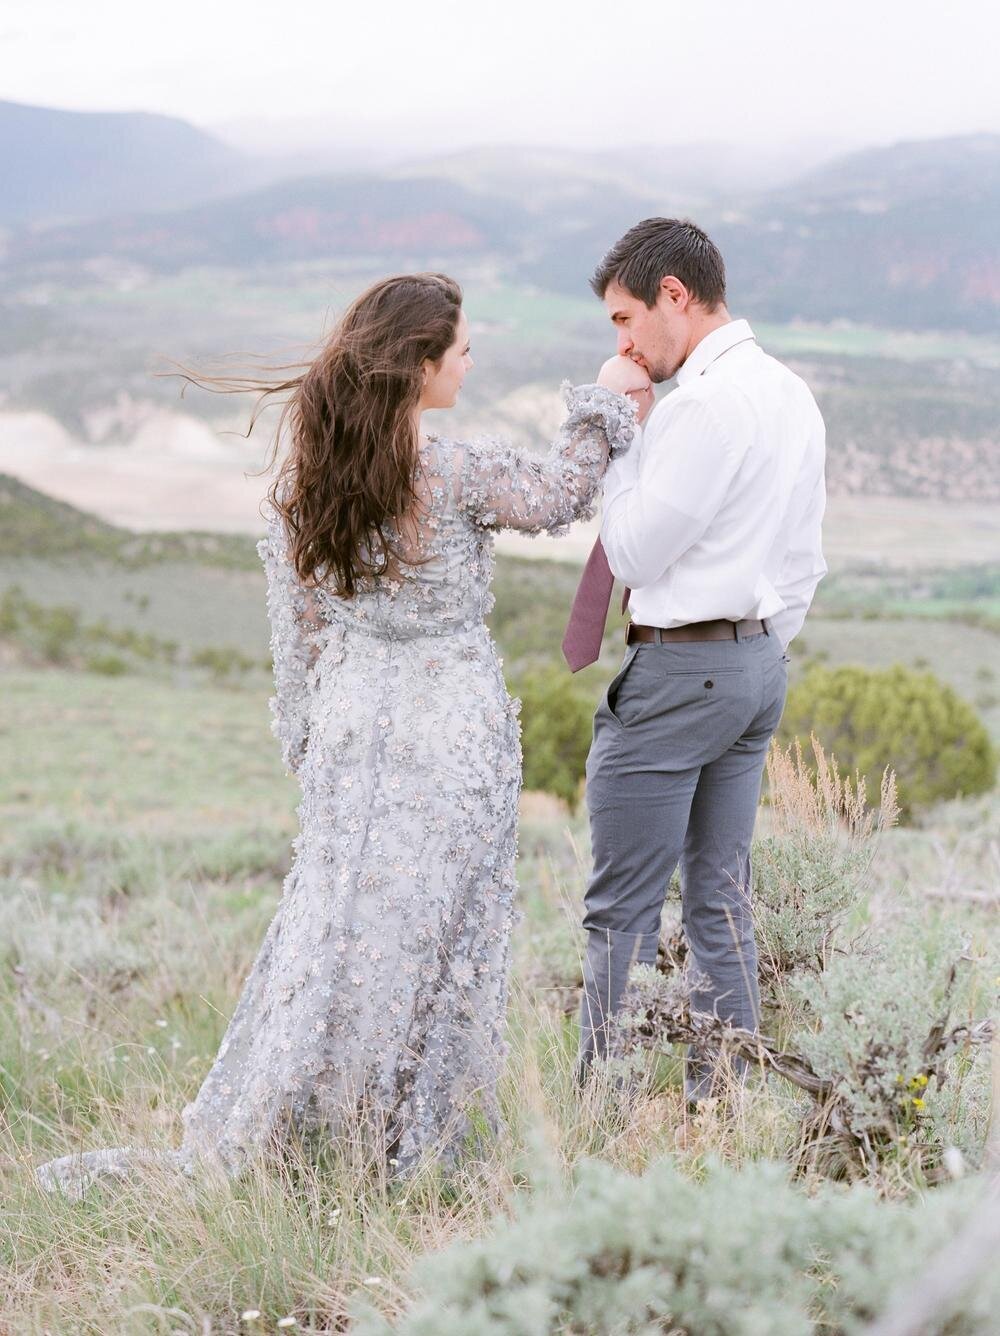 Man-kissing-woman’s-hand-white-looking-out-into-vail-Colorado-mountains-.jpg